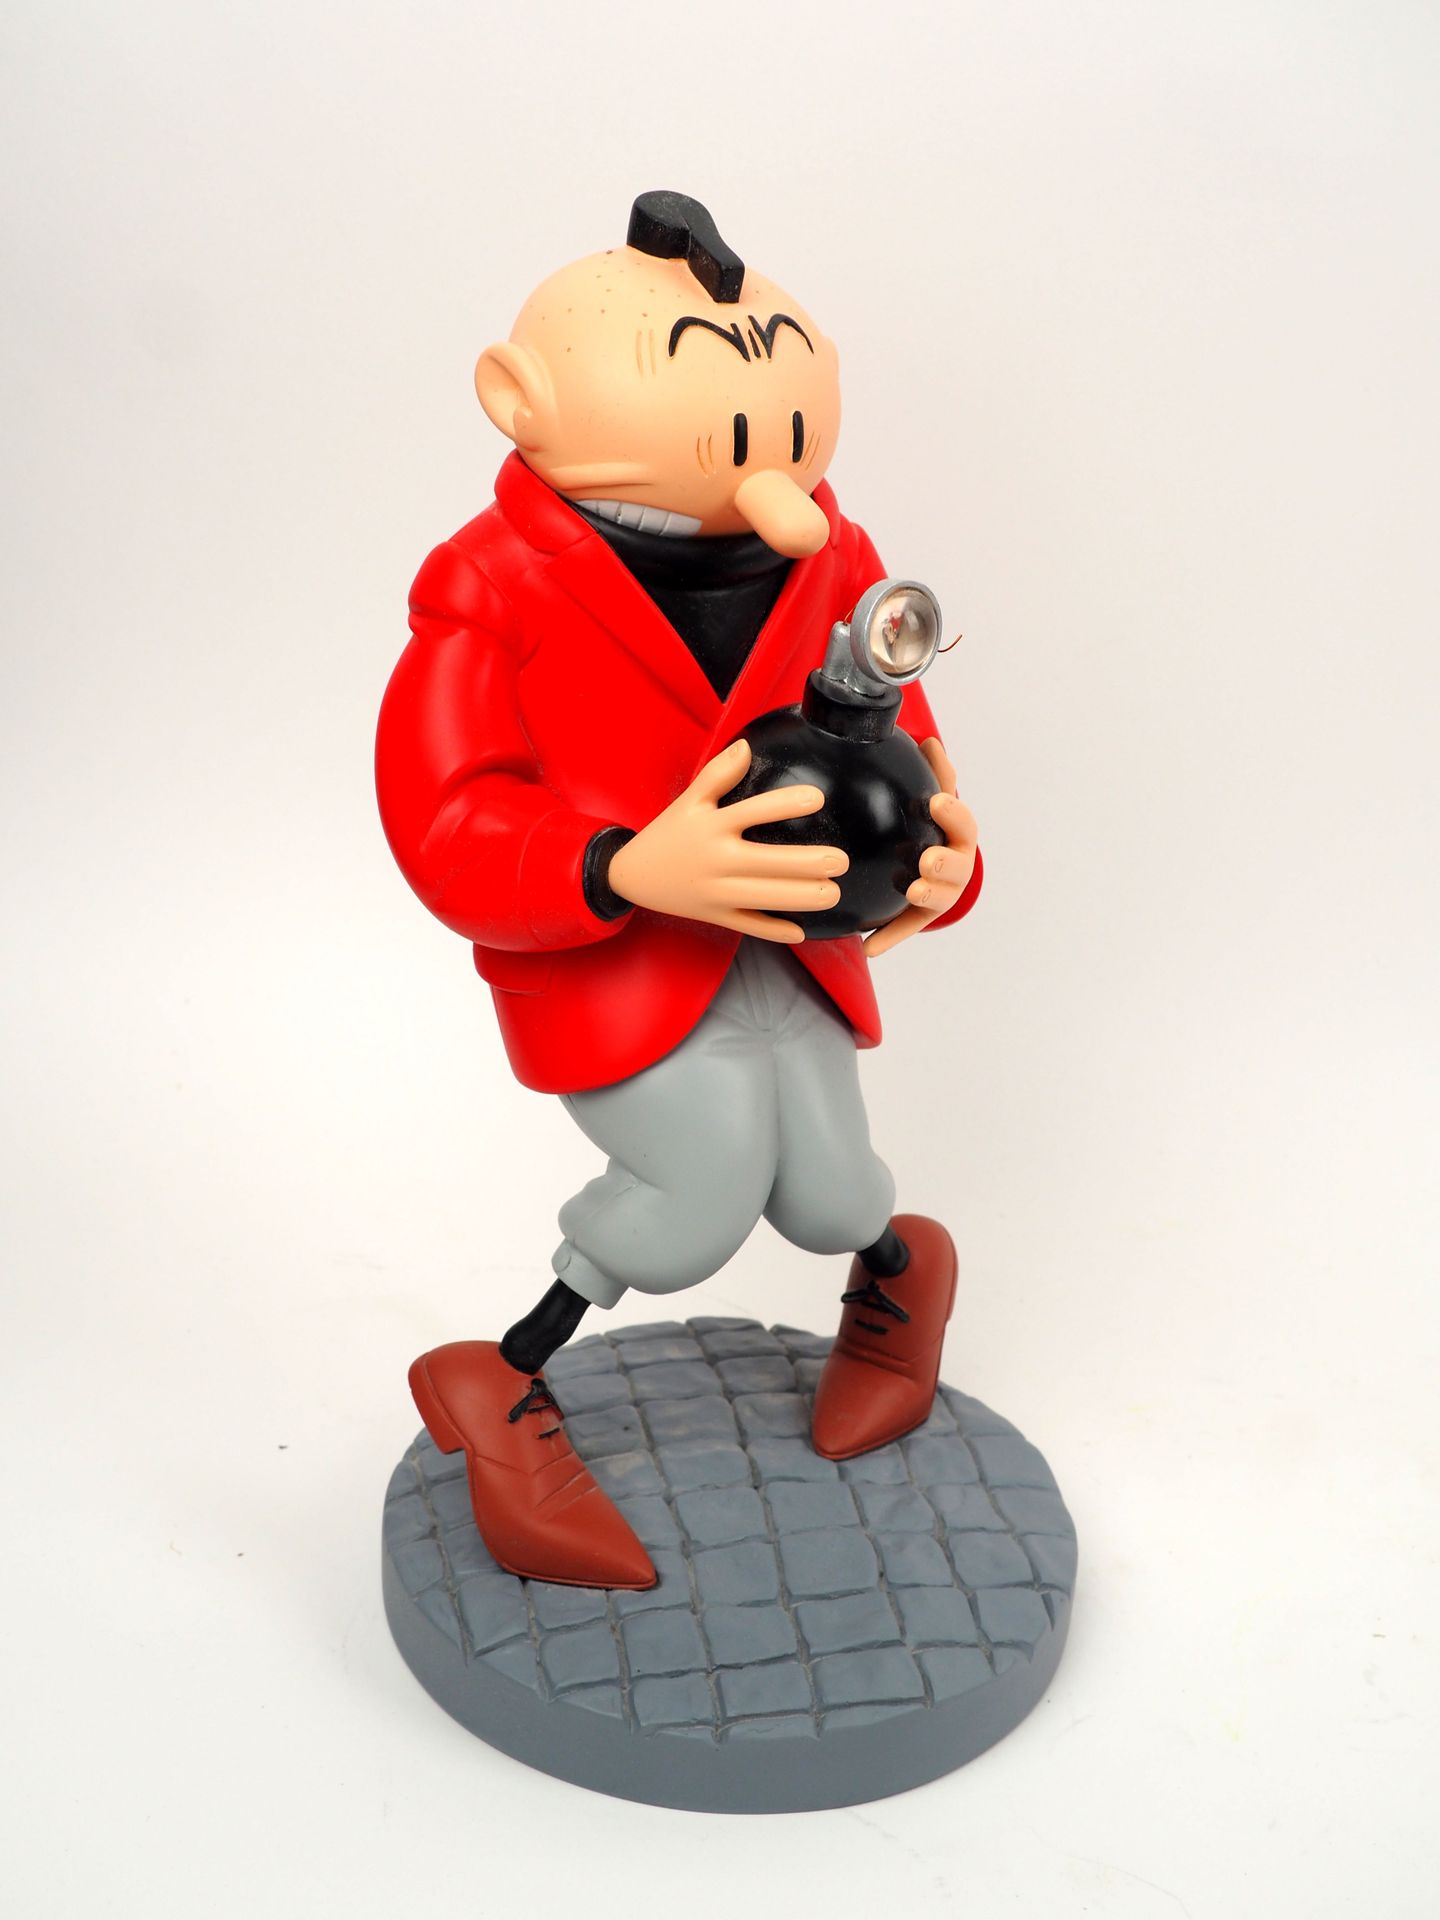 Null CHALAND
Bob Fish with a bomb
Figurine made by St Emett, limited edition of &hellip;